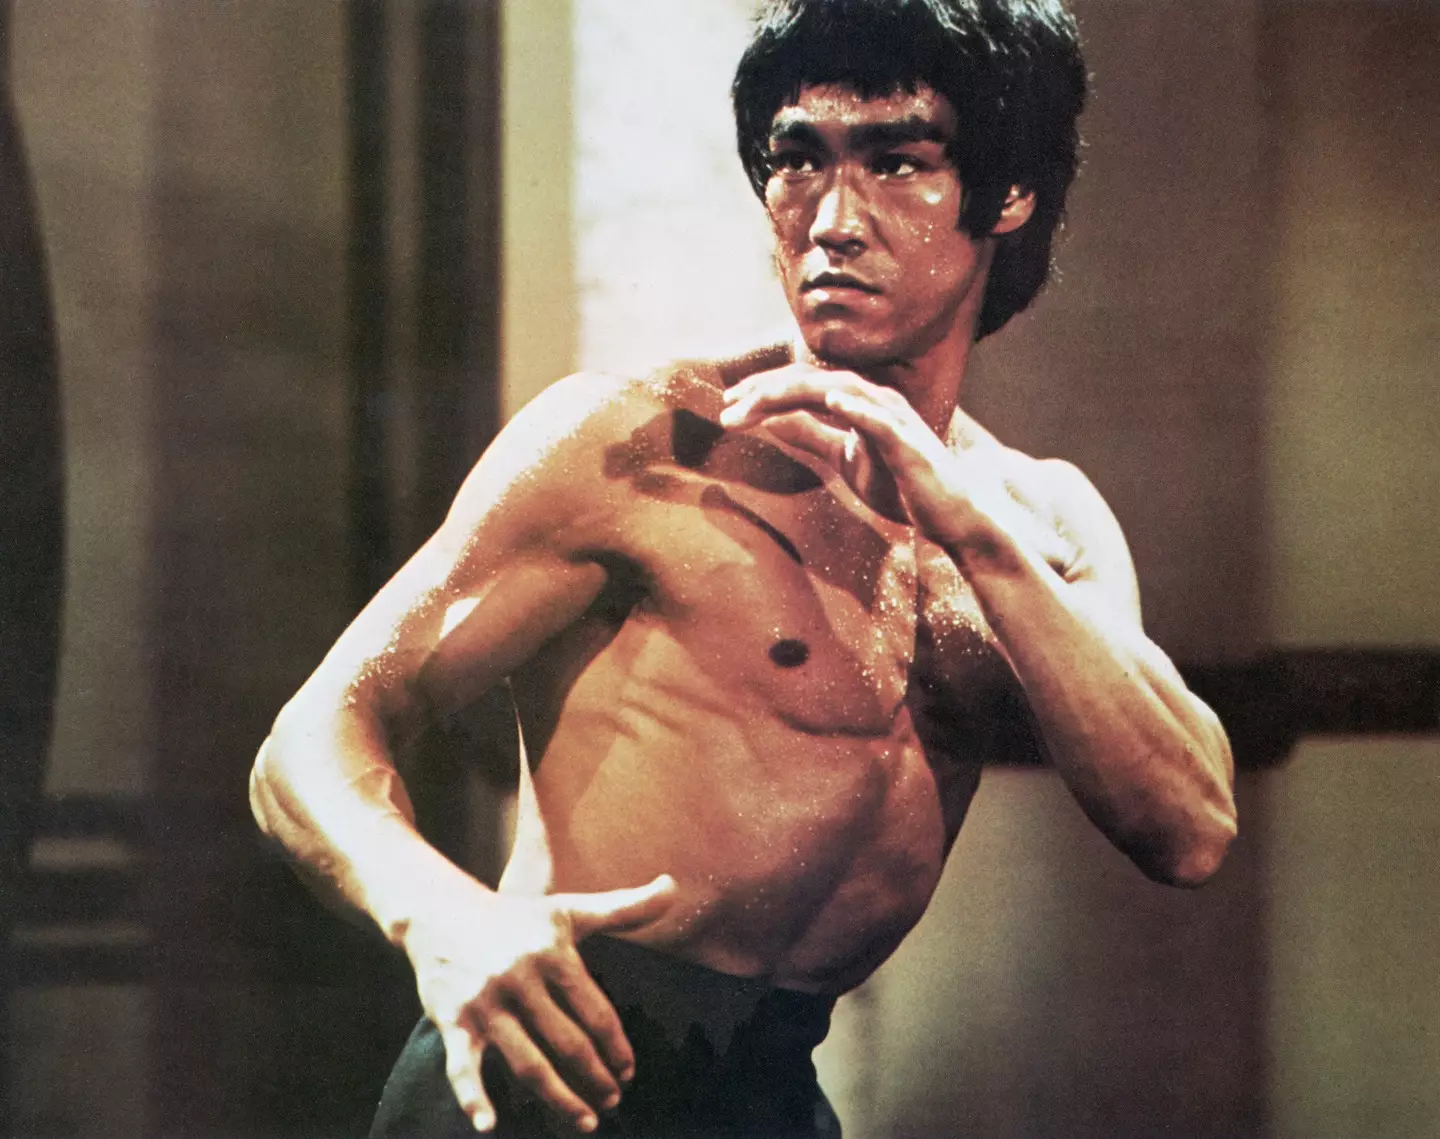 Bruce Lee died in 1973 at the age of 32.